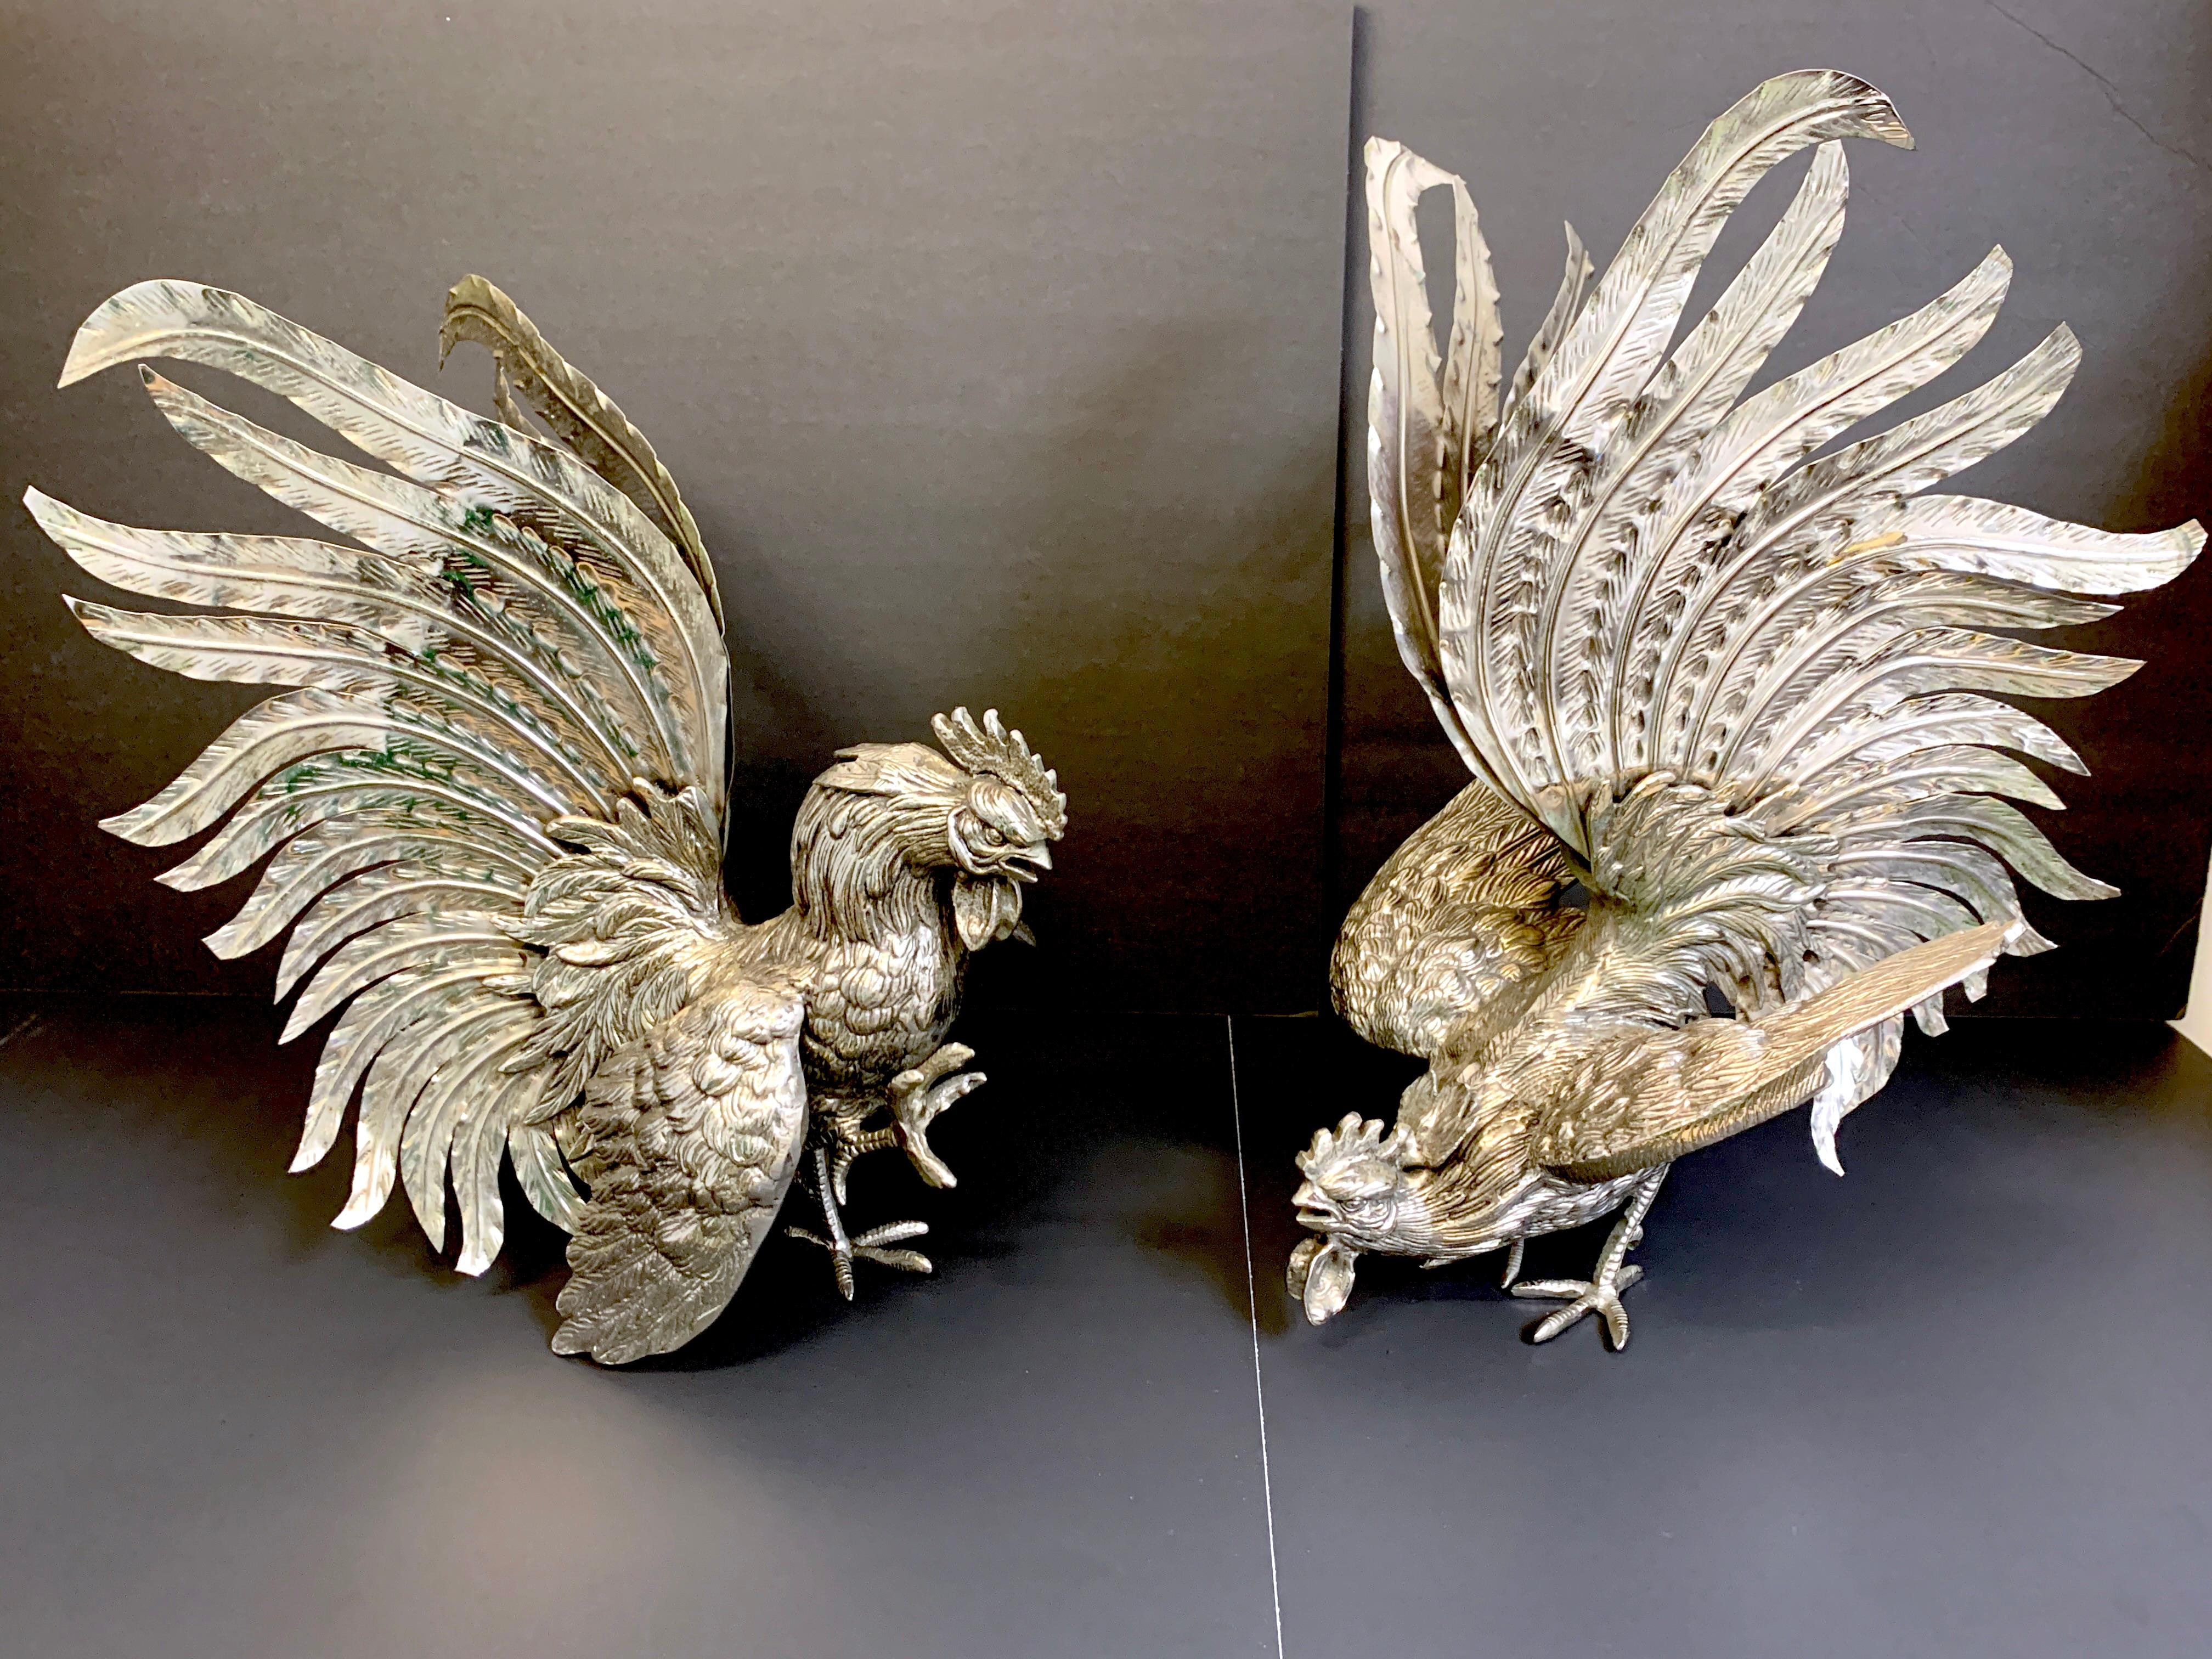 A large pair of silver plated fighting cockerel ornaments, each one a substantial rendition realistically cast and modeled. These are a most impressive pair of silver plated sculptures. Unmarked
Foot up- 16-inches high x 14.5 -inches wide x